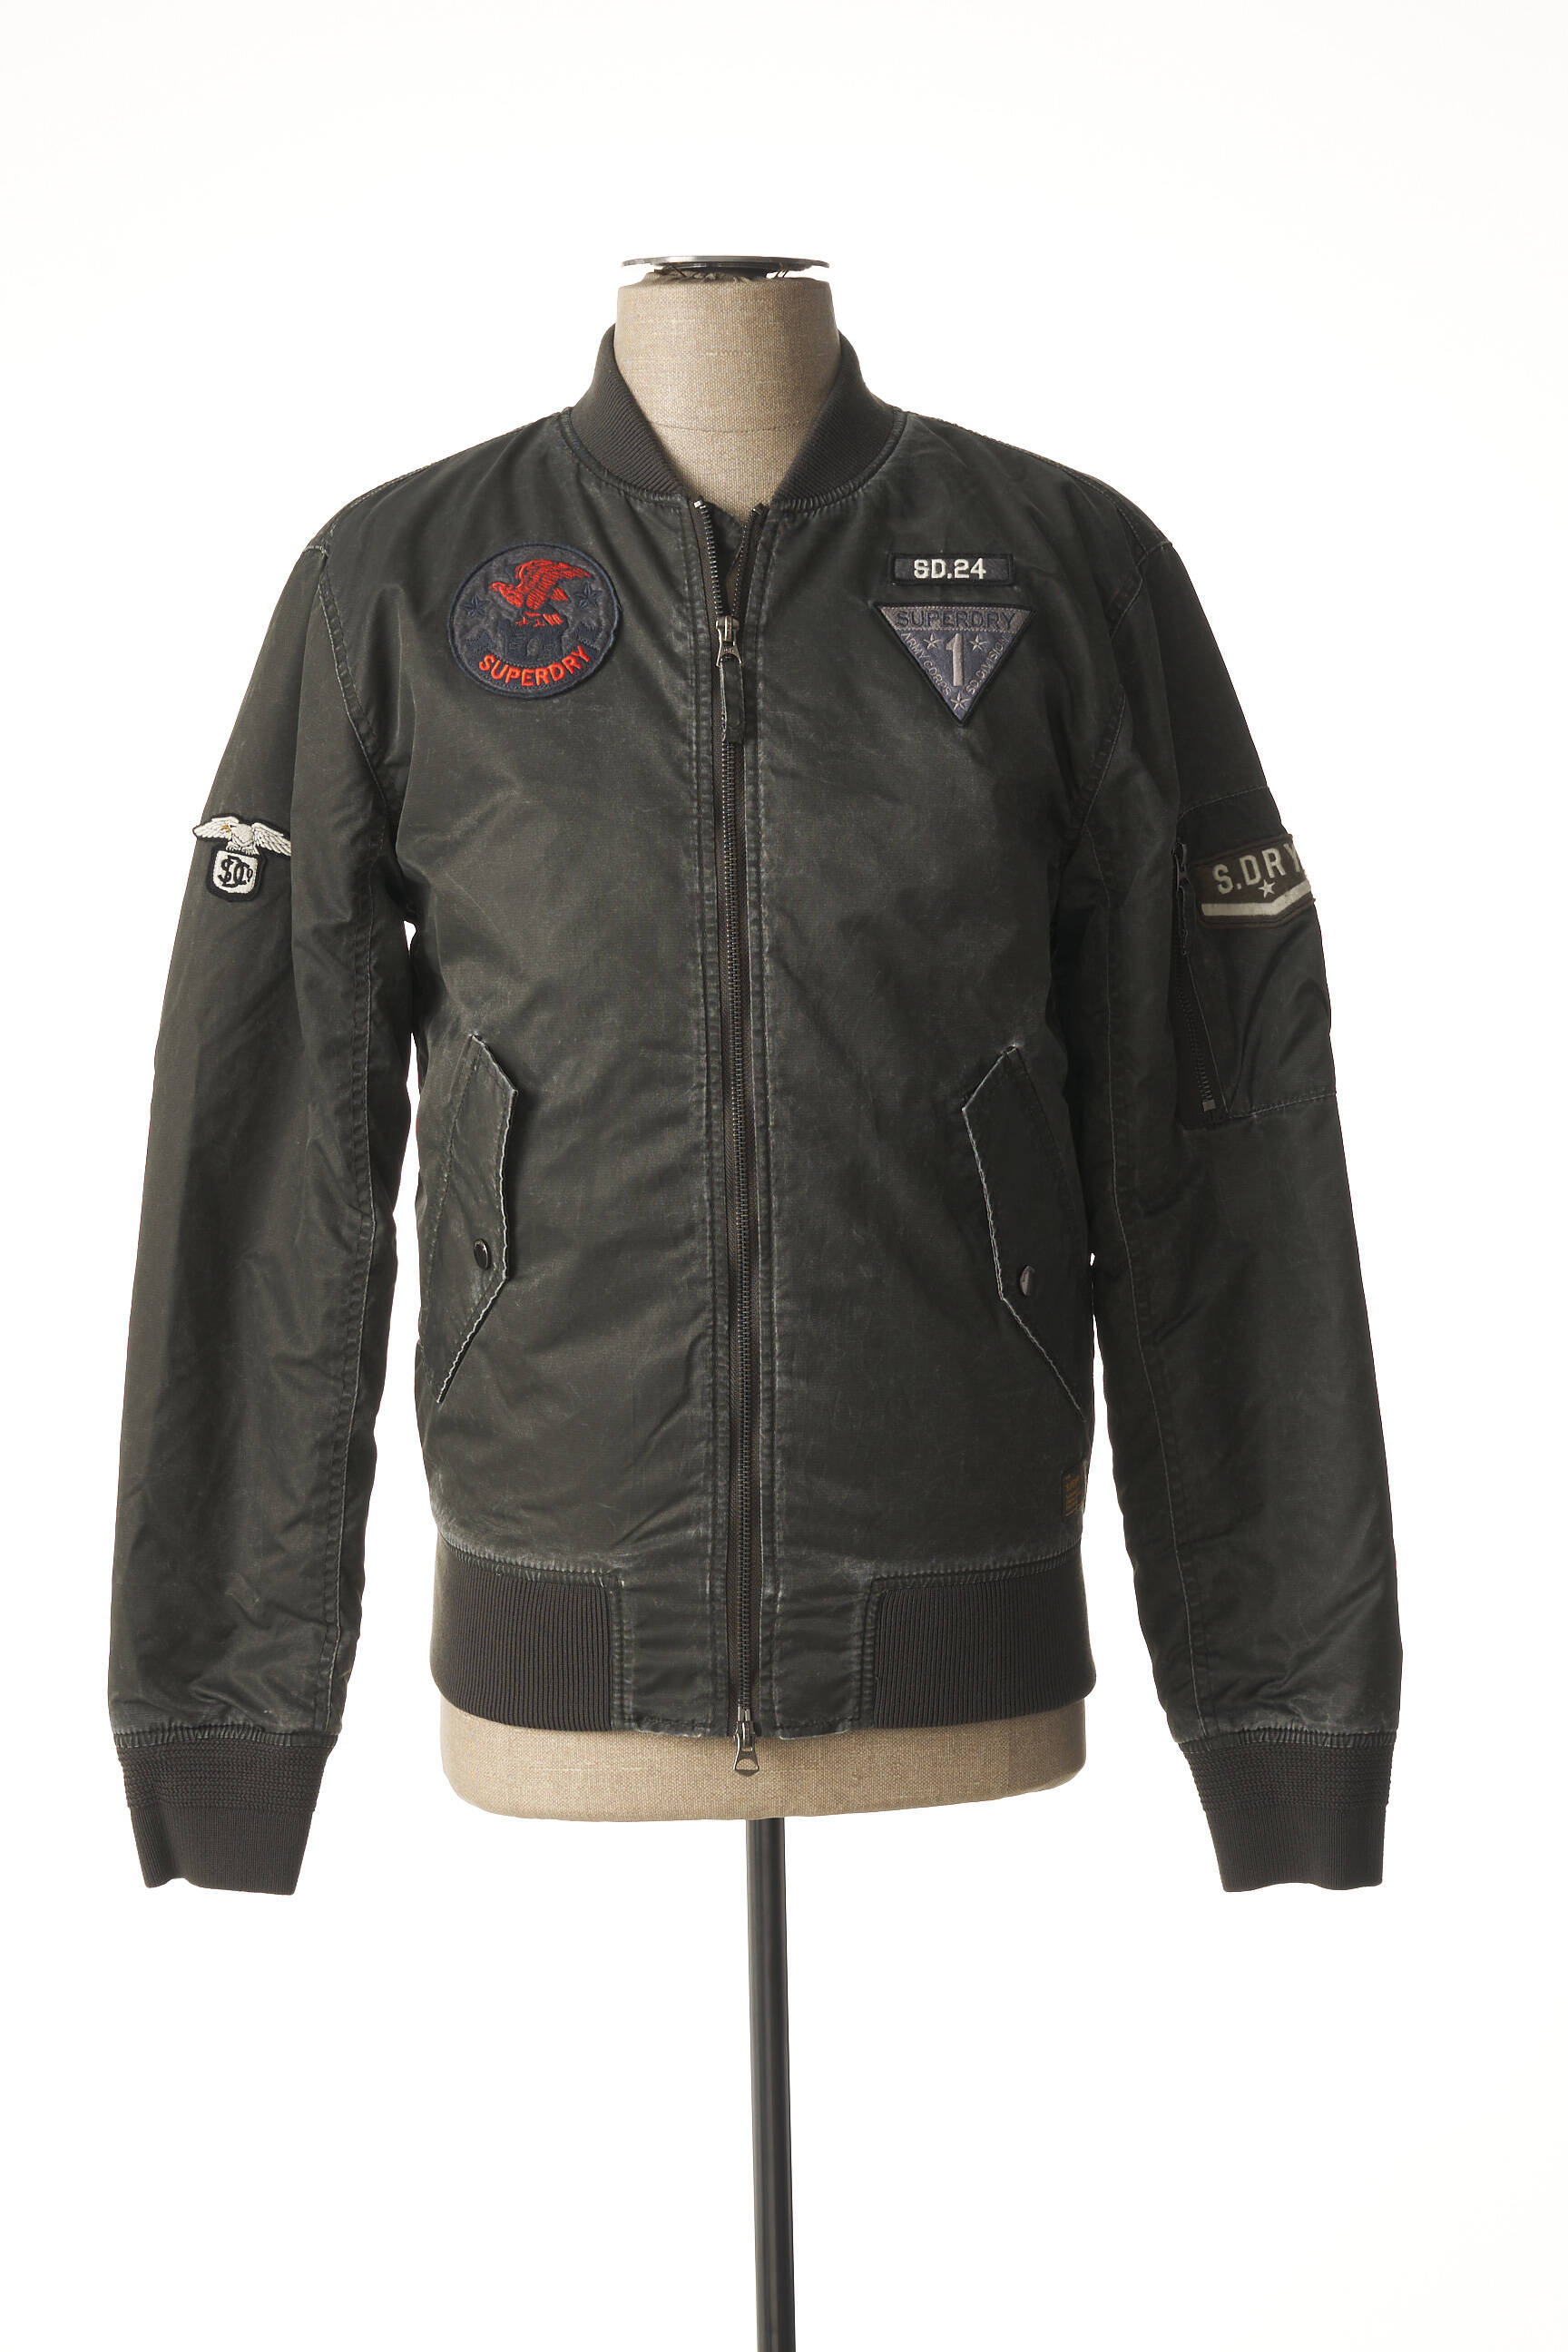 Veste Superdry Homme - Taille XS